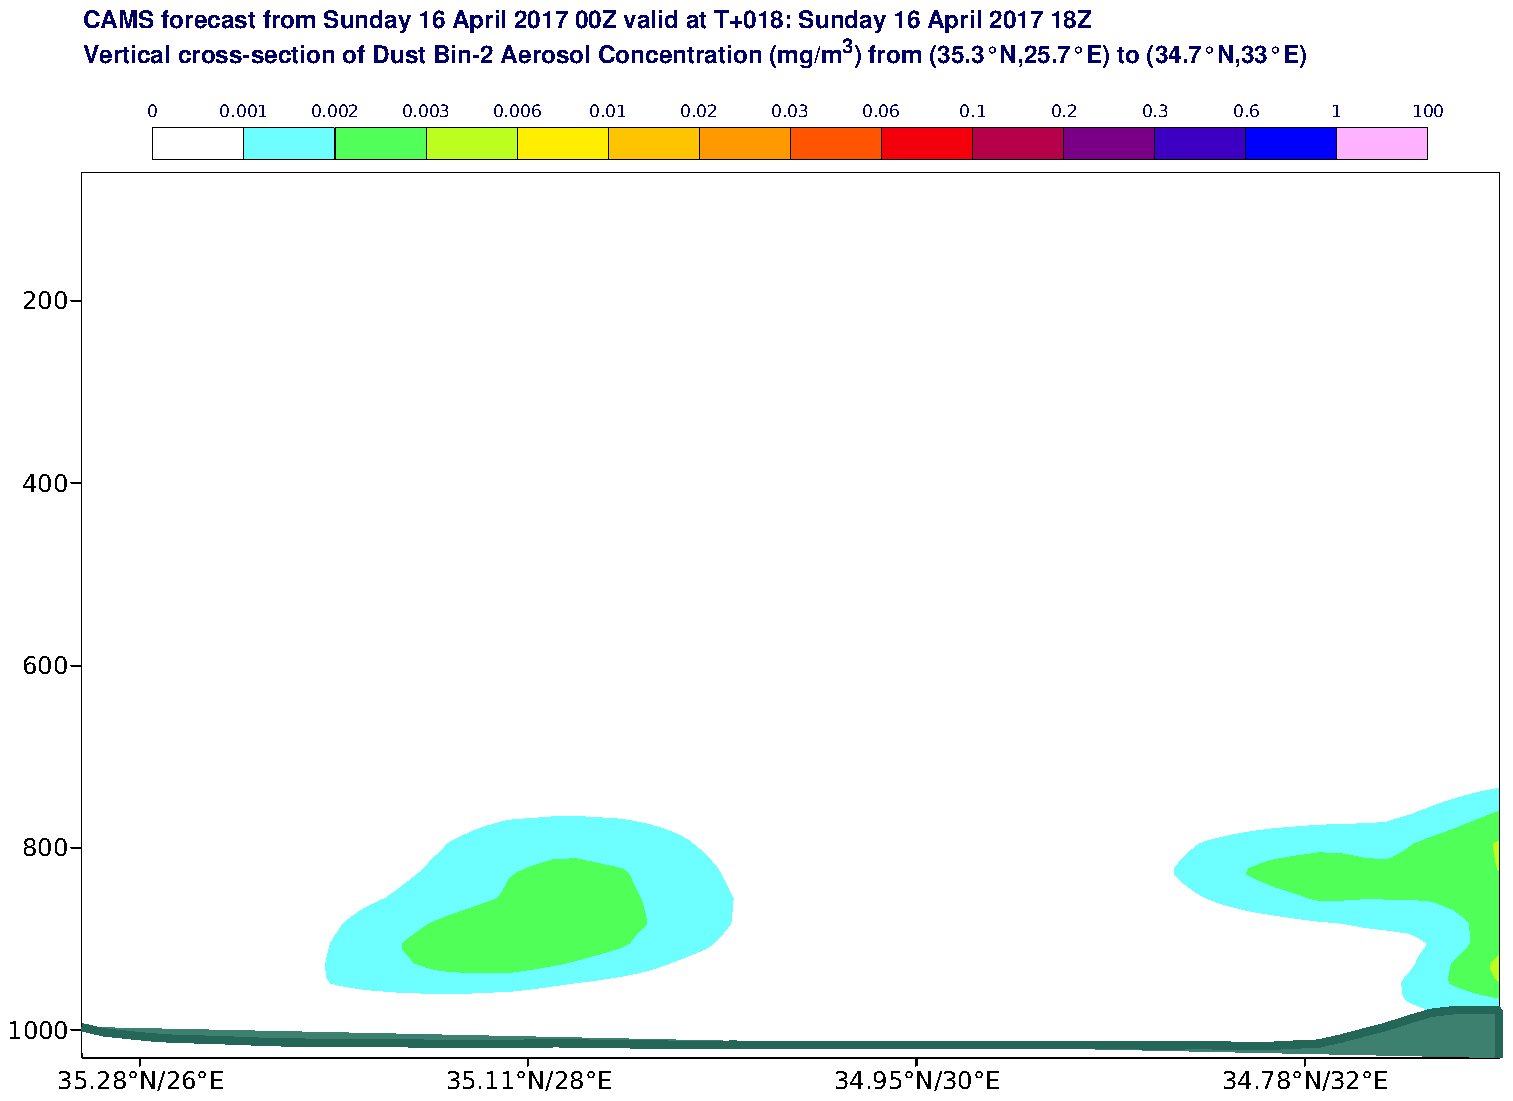 Vertical cross-section of Dust Bin-2 Aerosol Concentration (mg/m3) valid at T18 - 2017-04-16 18:00